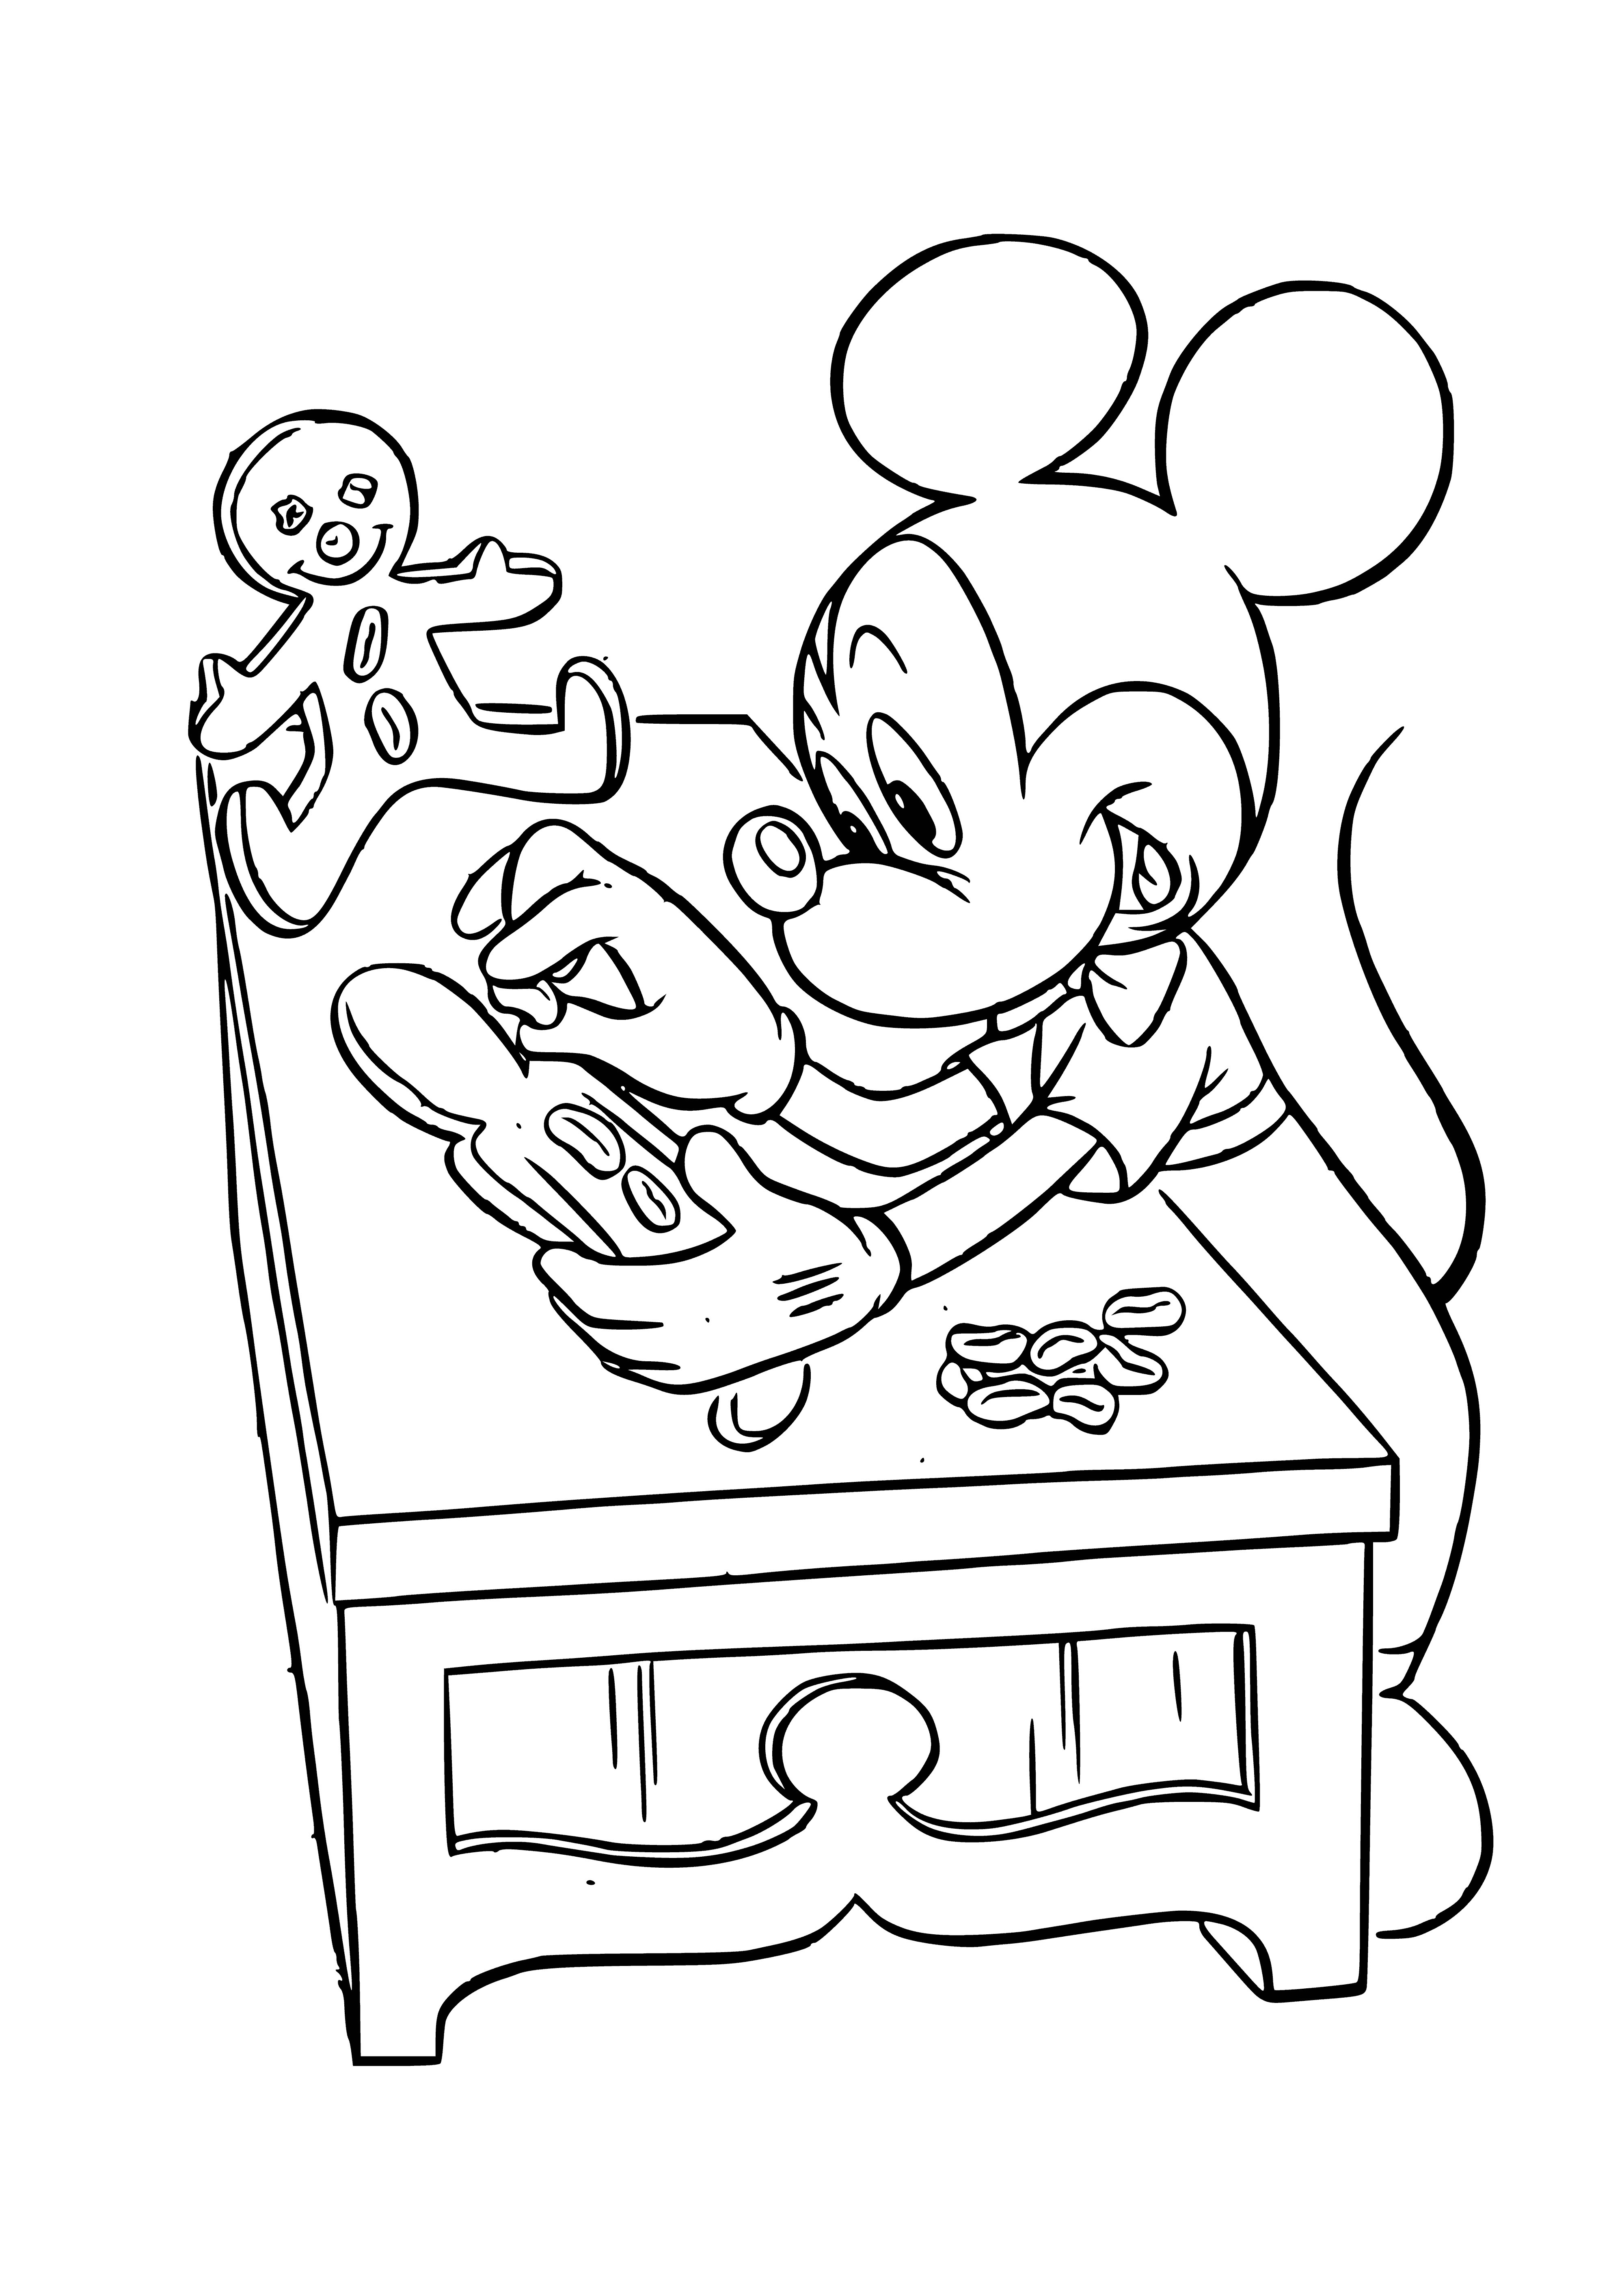 Cookies coloring page